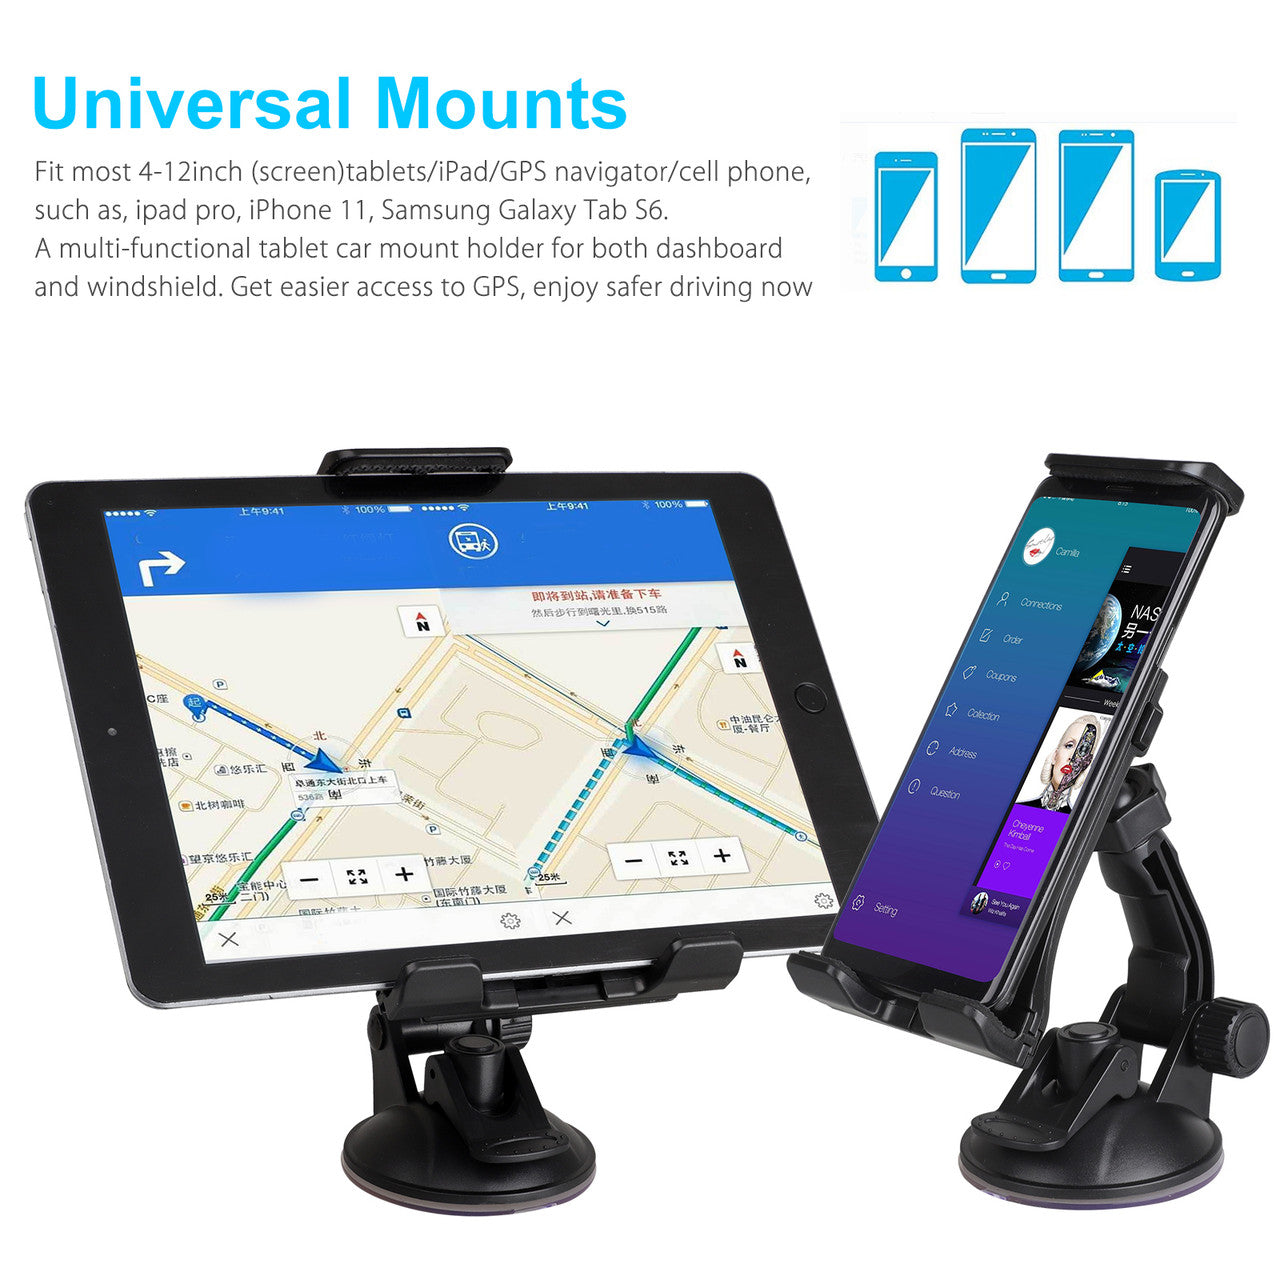 Car Tablet Holder, Tablet Dash Mount Holder for Car Windshield Dashboard - Universal Tablet Phone Car Mount w/ Suction Cup Compatible with iPad Mini Air 4 3/ Samsung Galaxy Tab & All 4-12" Tablets